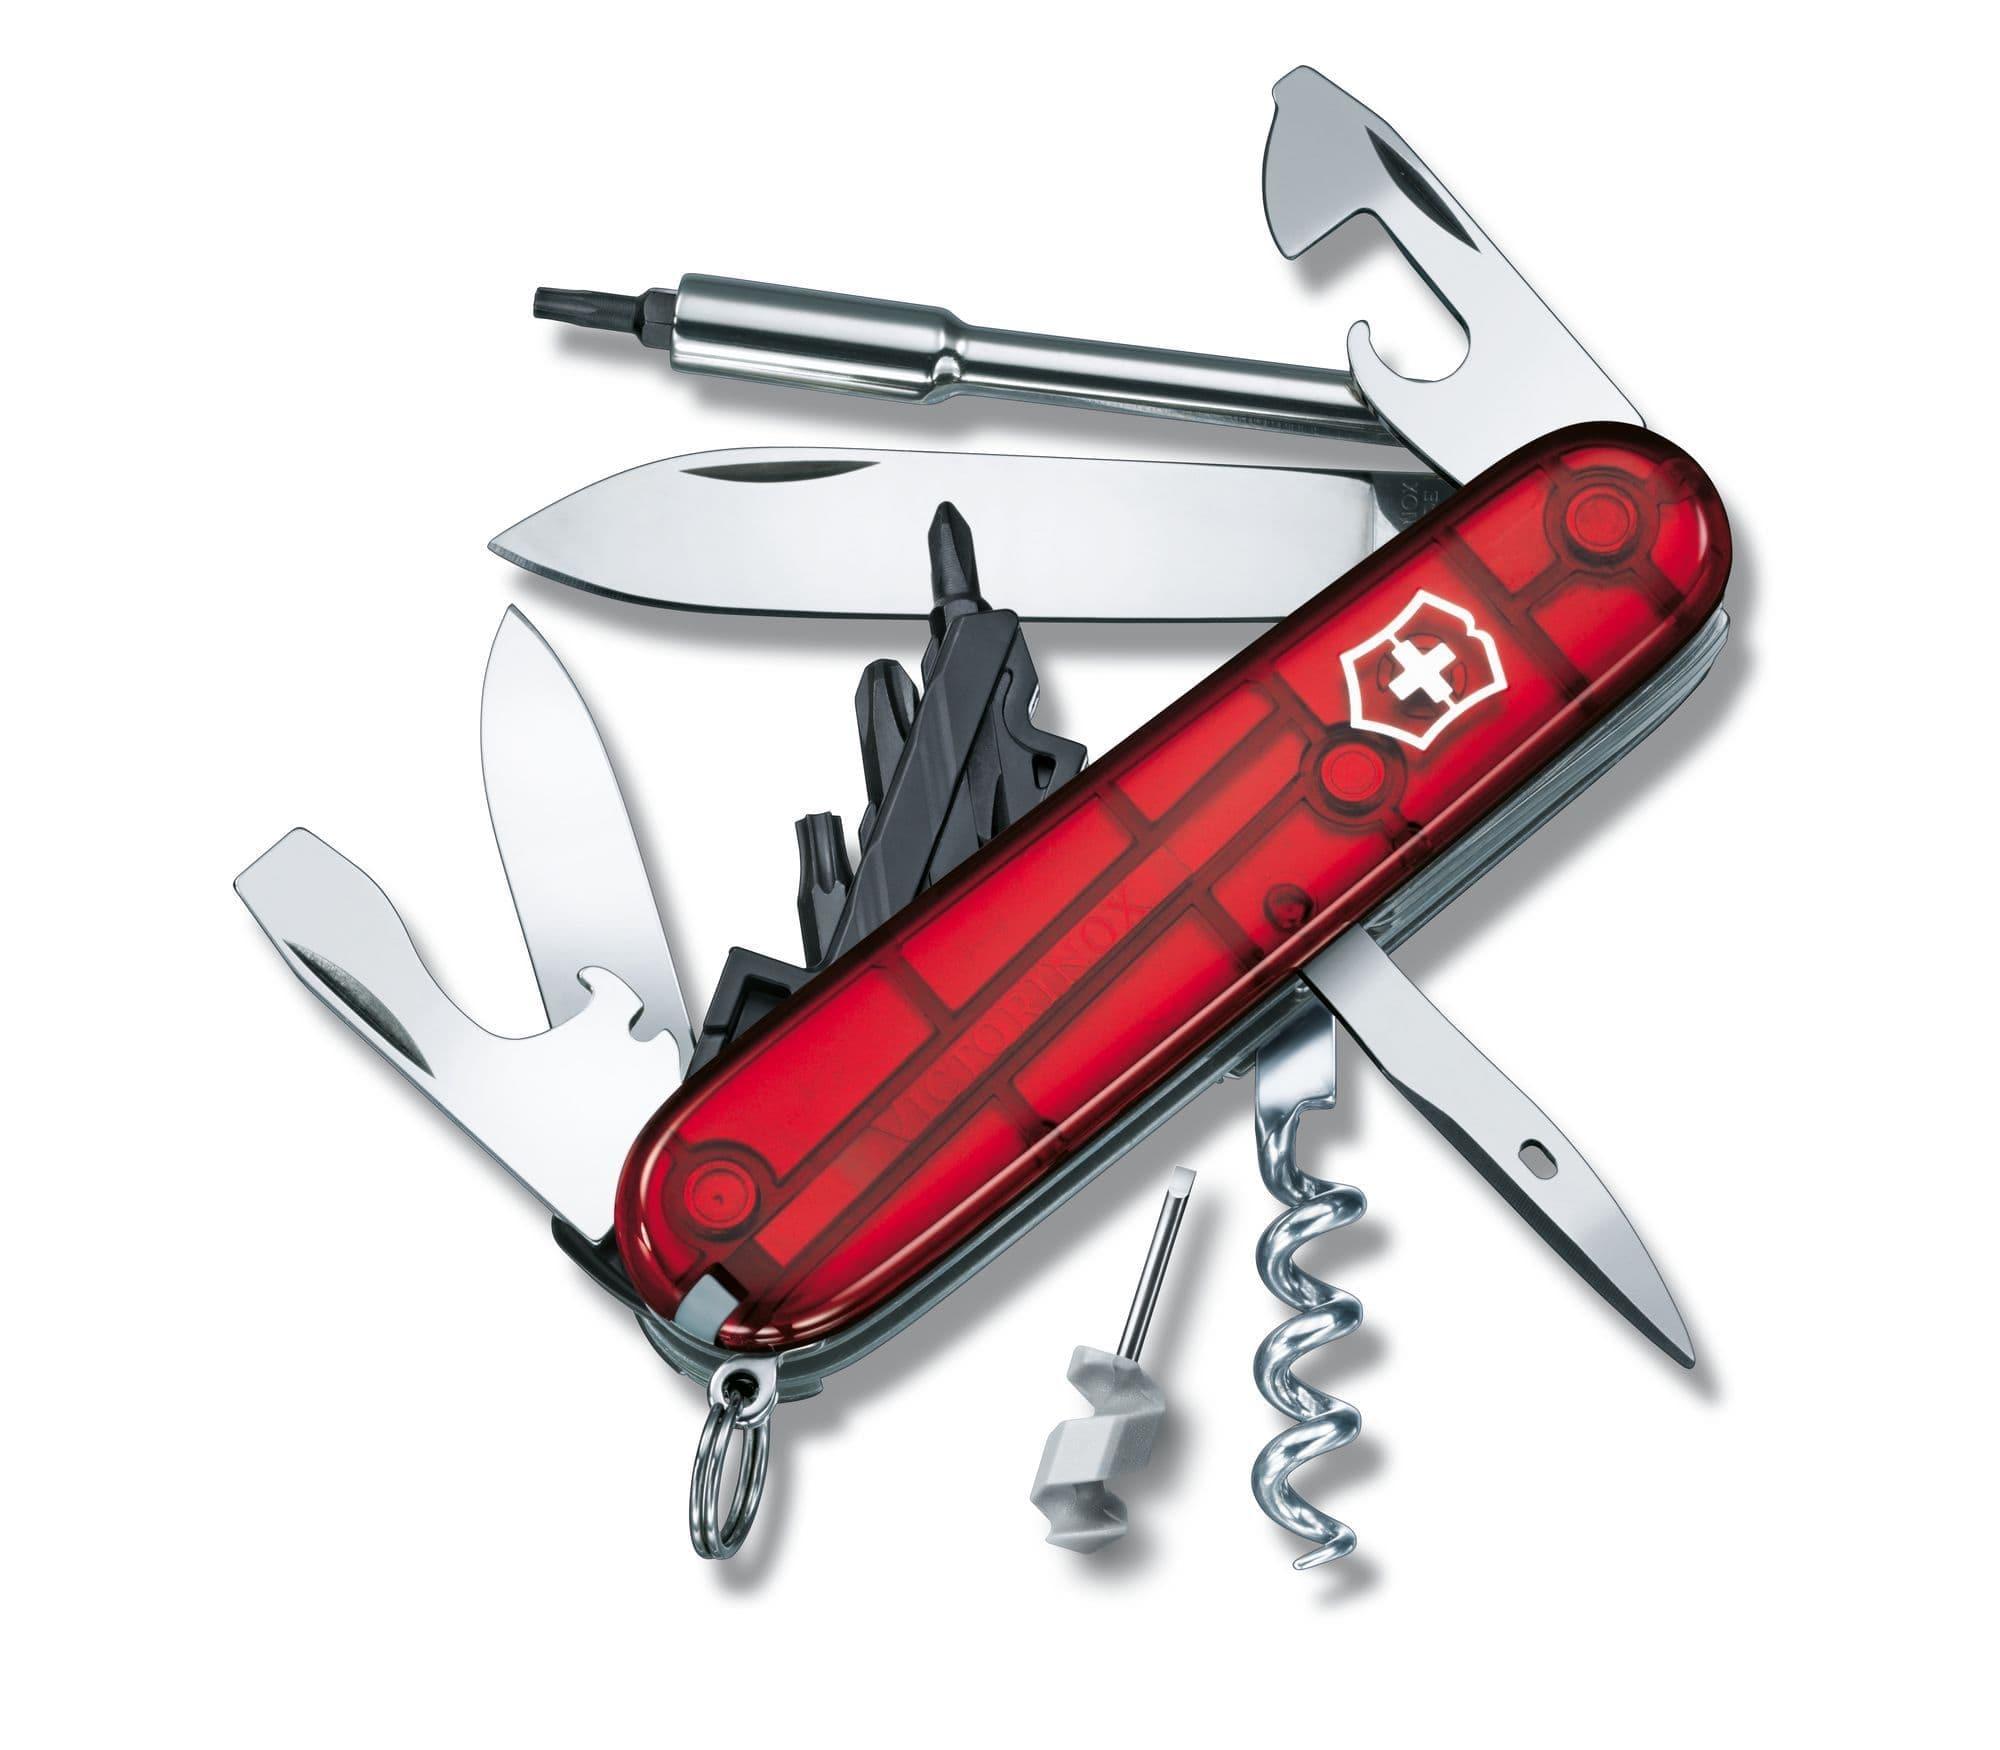 Victorinox Swiss Army Knife Cybertool 91mm Red Translusant With 27 Functions - 1.7605.T